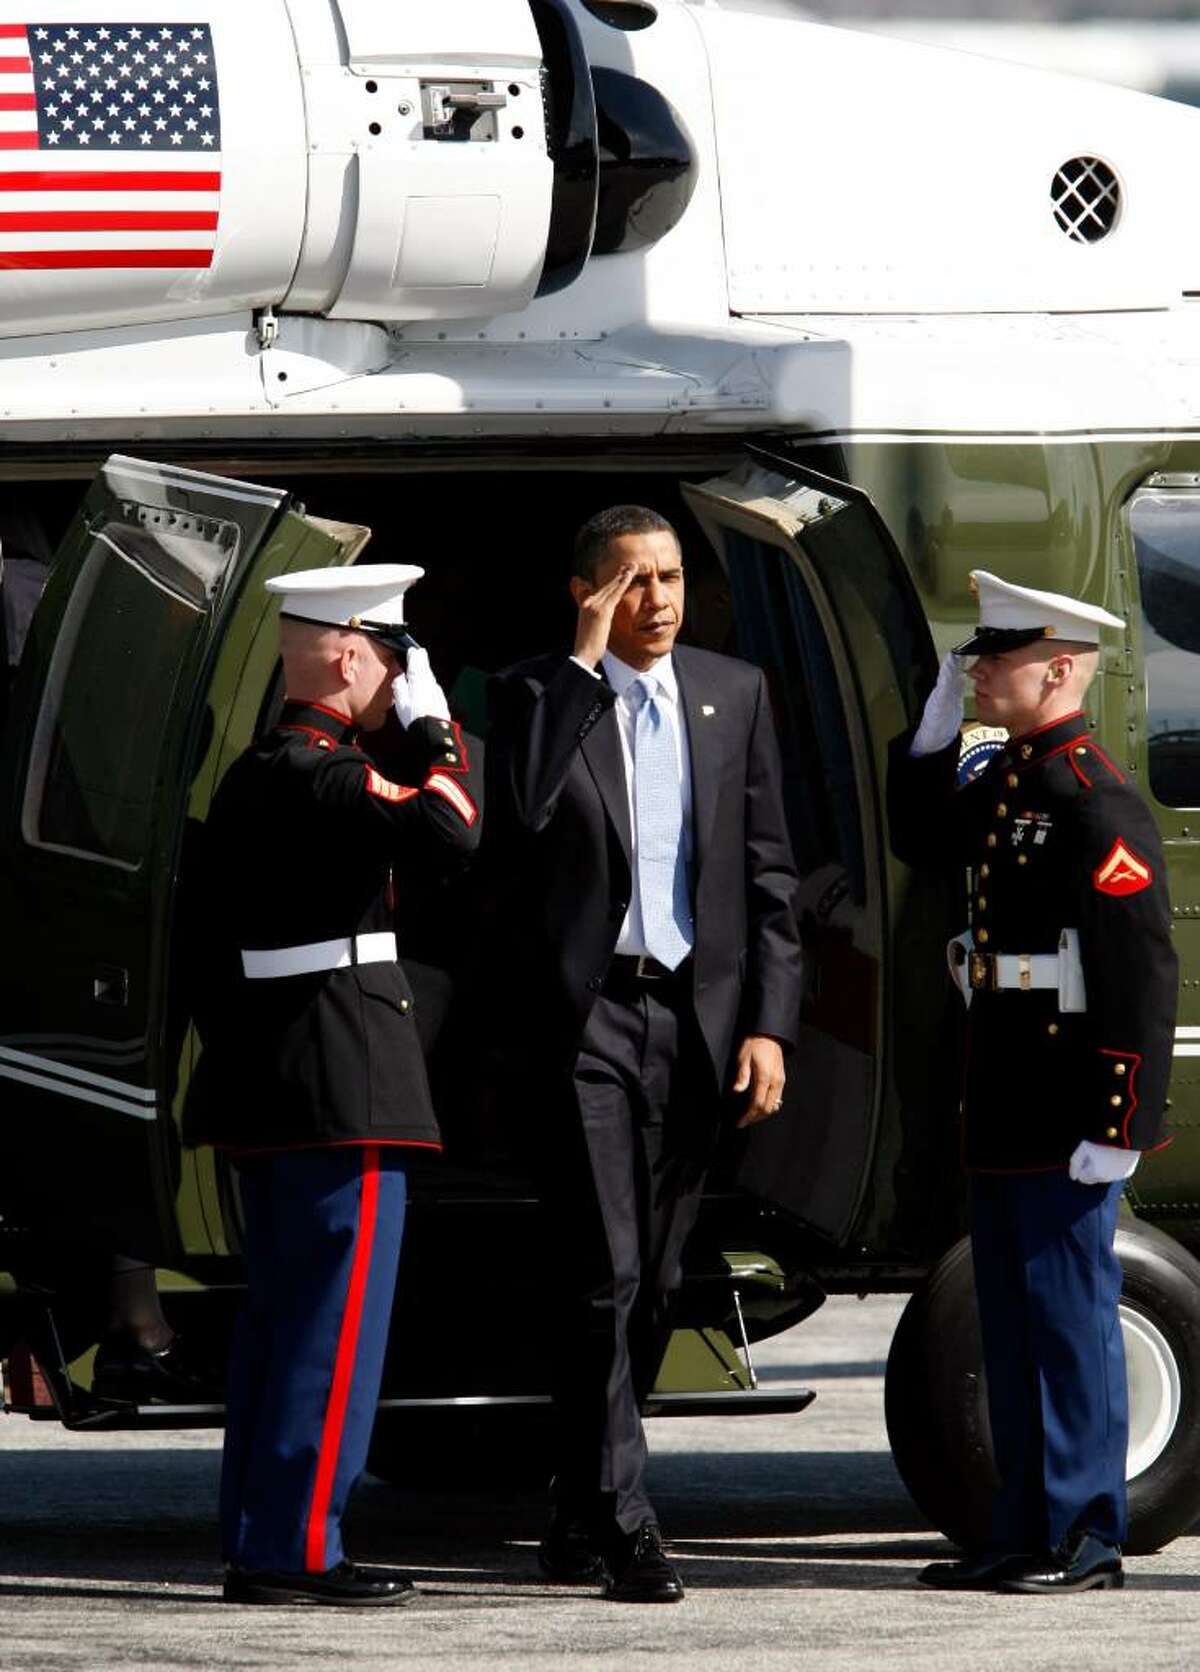 Sikorsky has a long history in supplying the Marines with presidential helicopters dating to President Eisenhower's use of the Sikorsky H-42 in 1958. In this photo, President Barack Obama salutes as he steps off of one of the smaller Sikorsky VH-60 helicopters.